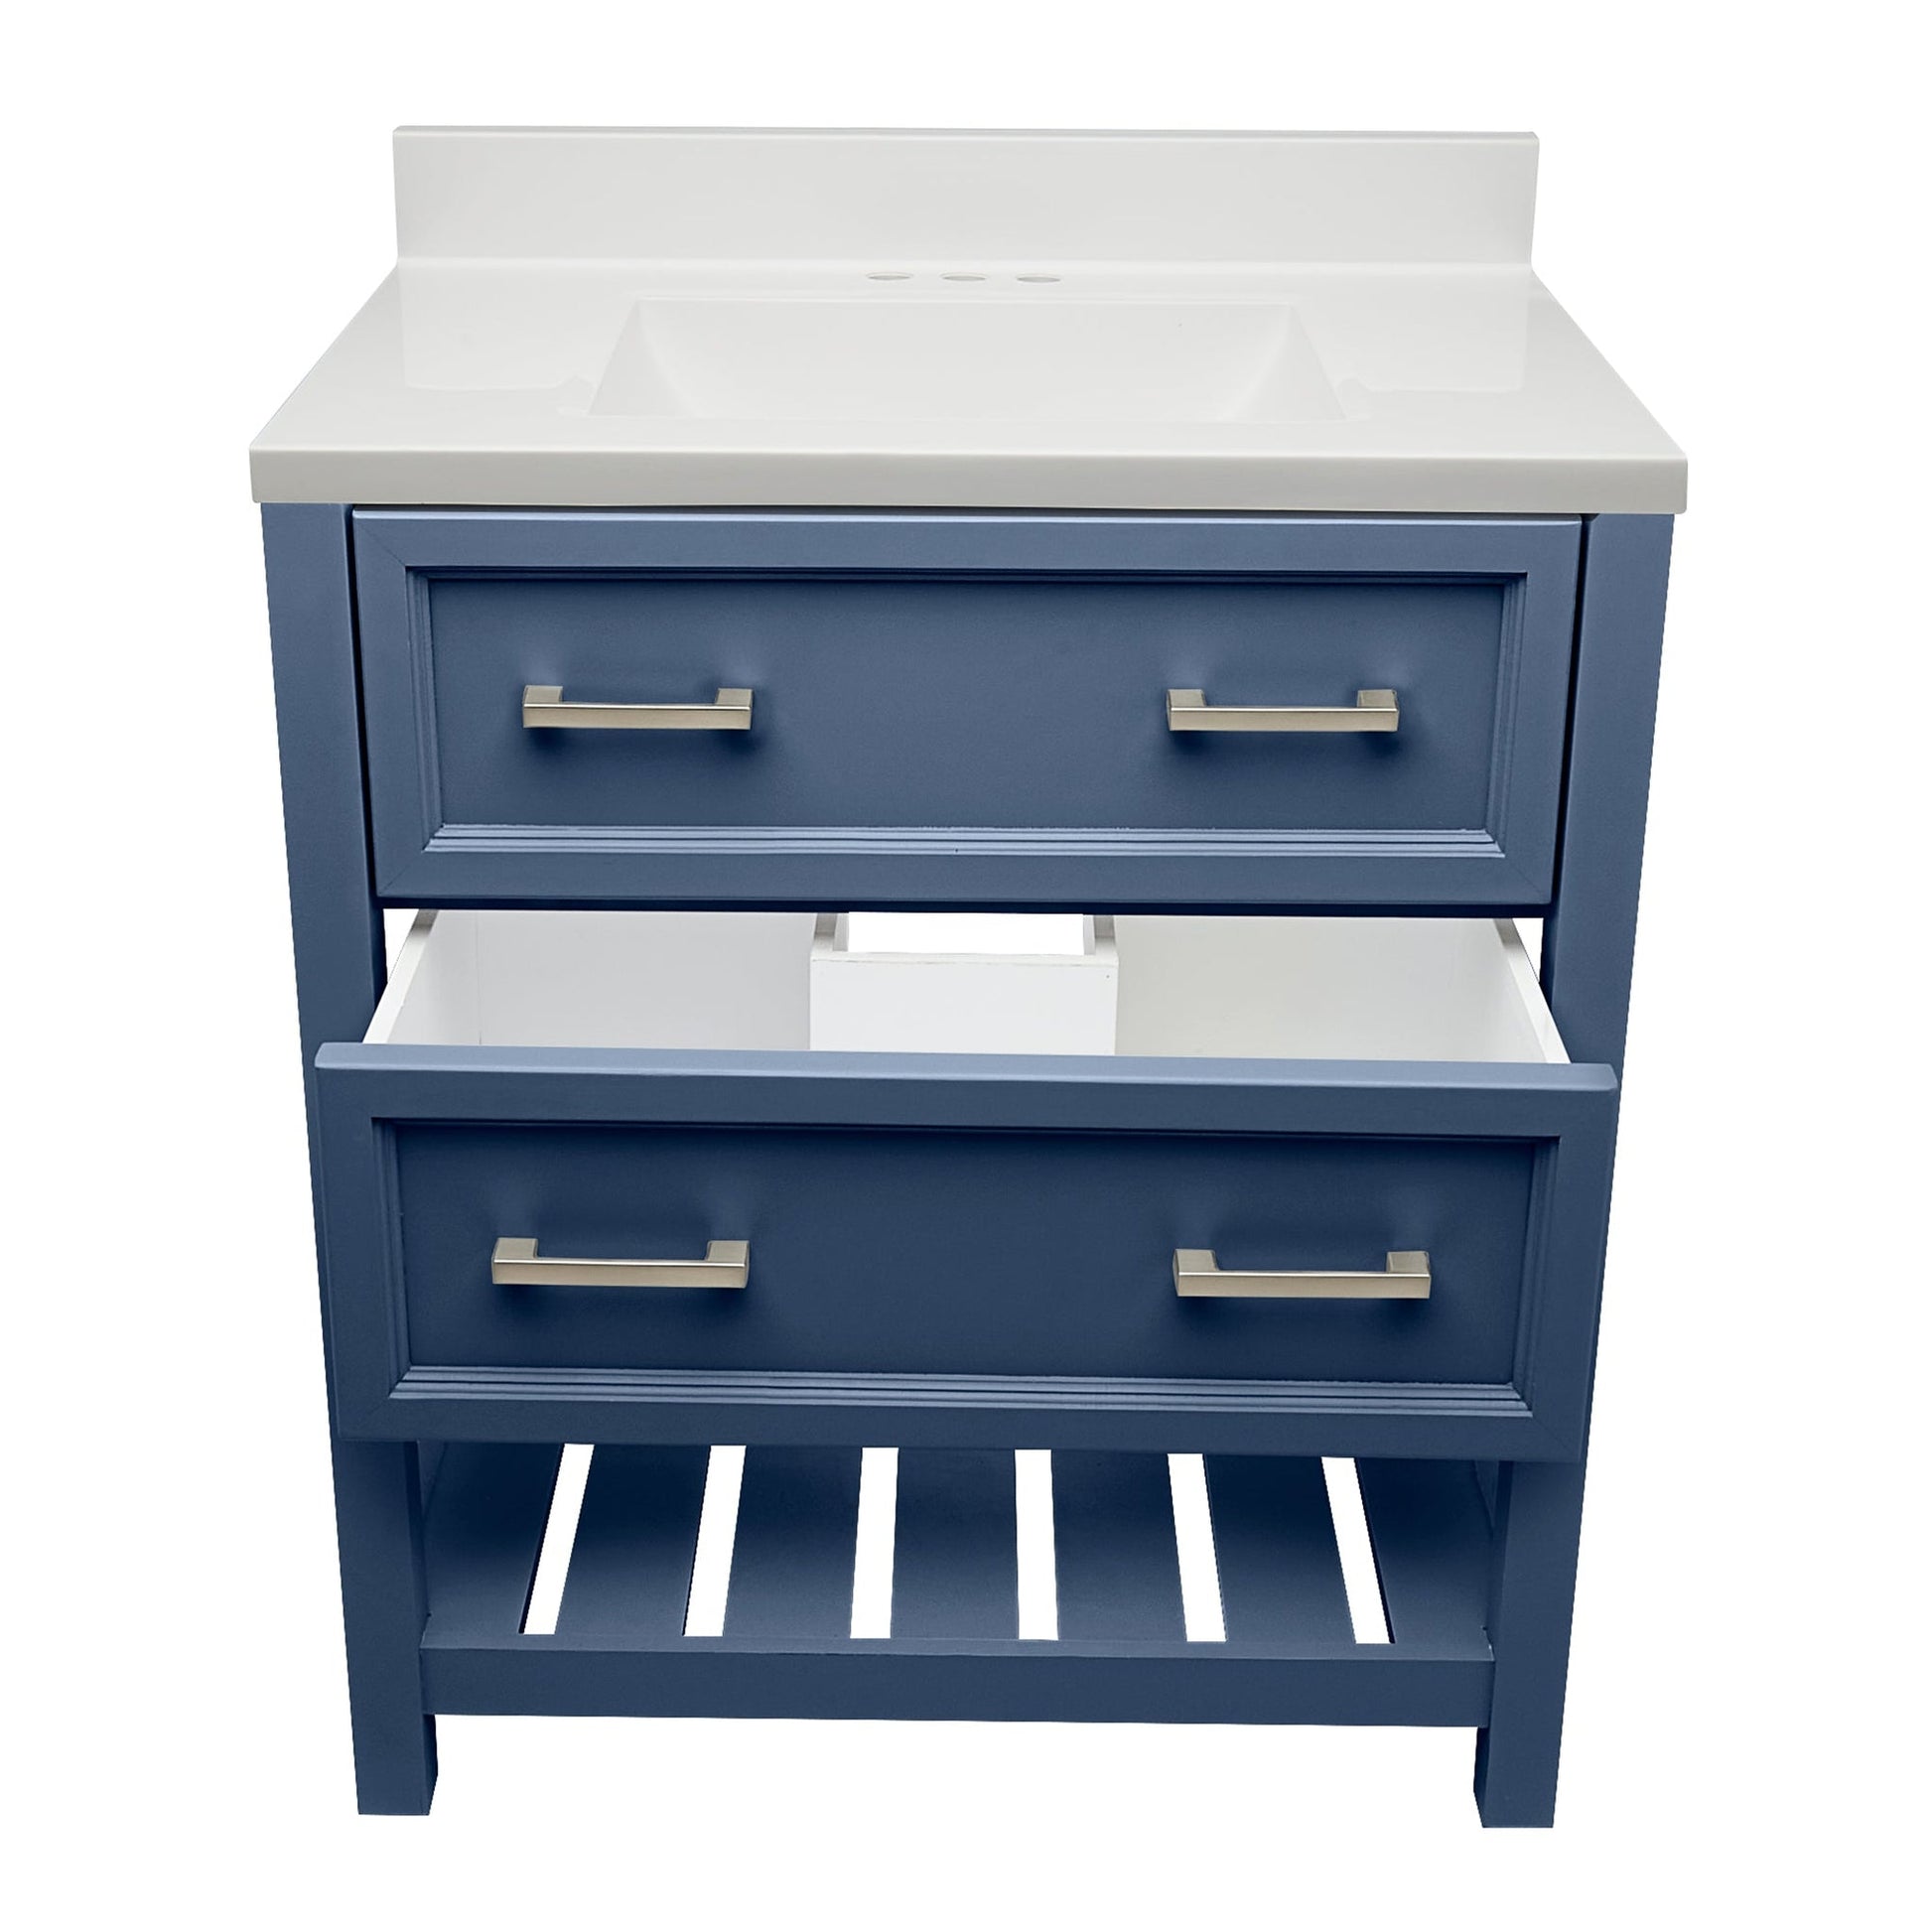 Ella's Bubbles Tremblant 31" Navy Blue Bathroom Vanity With White Cultured Marble Top With White Backsplash and Sink